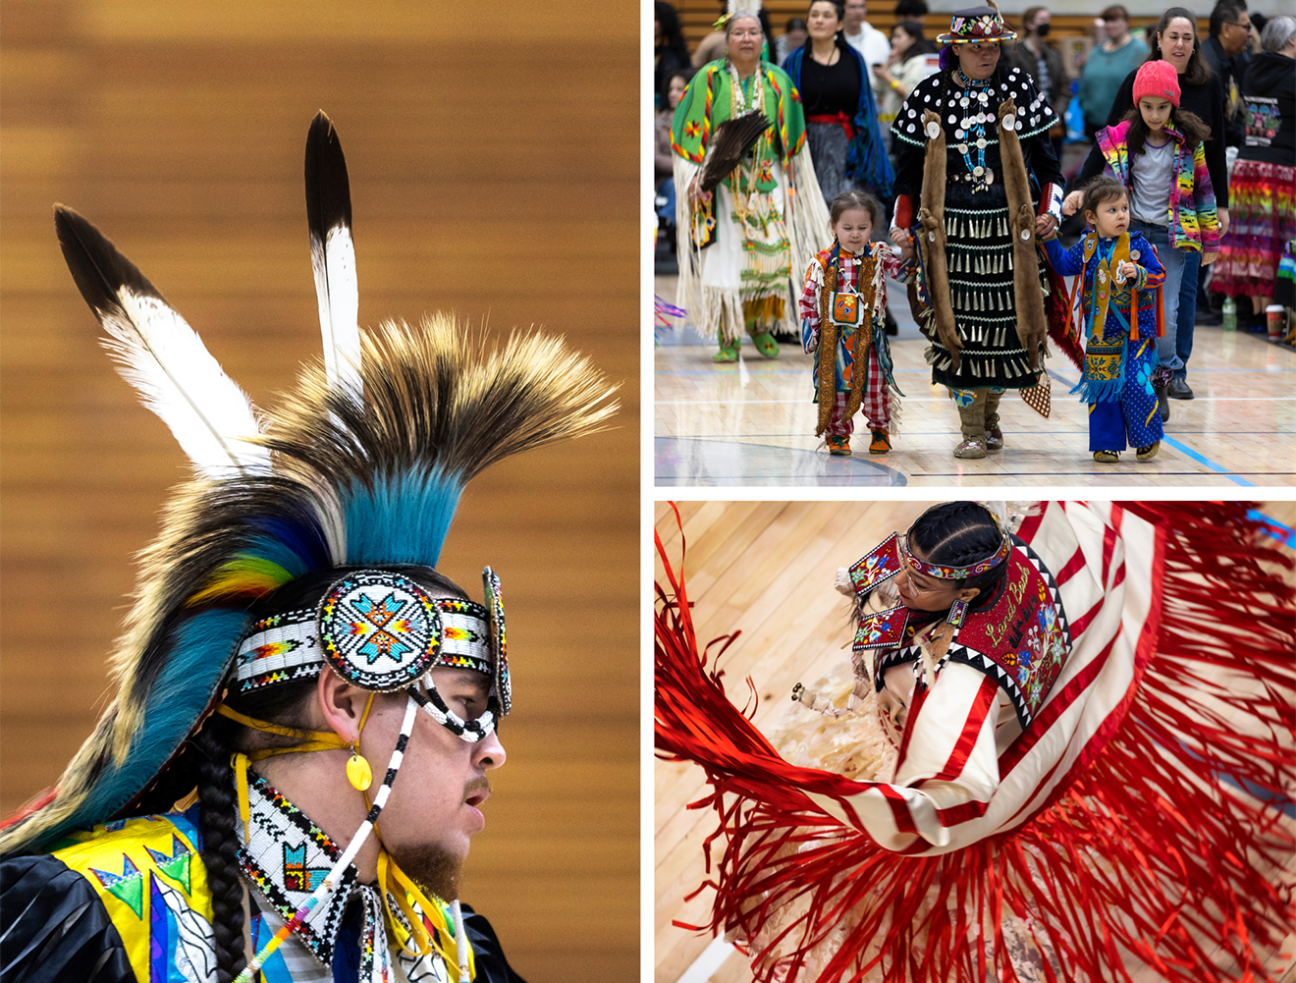 photo collage shows Indigenous man wearing beautiful headdress, a woman with two young children in tradiitonal clothing and an overhead view of a twirling Indigenous dancer